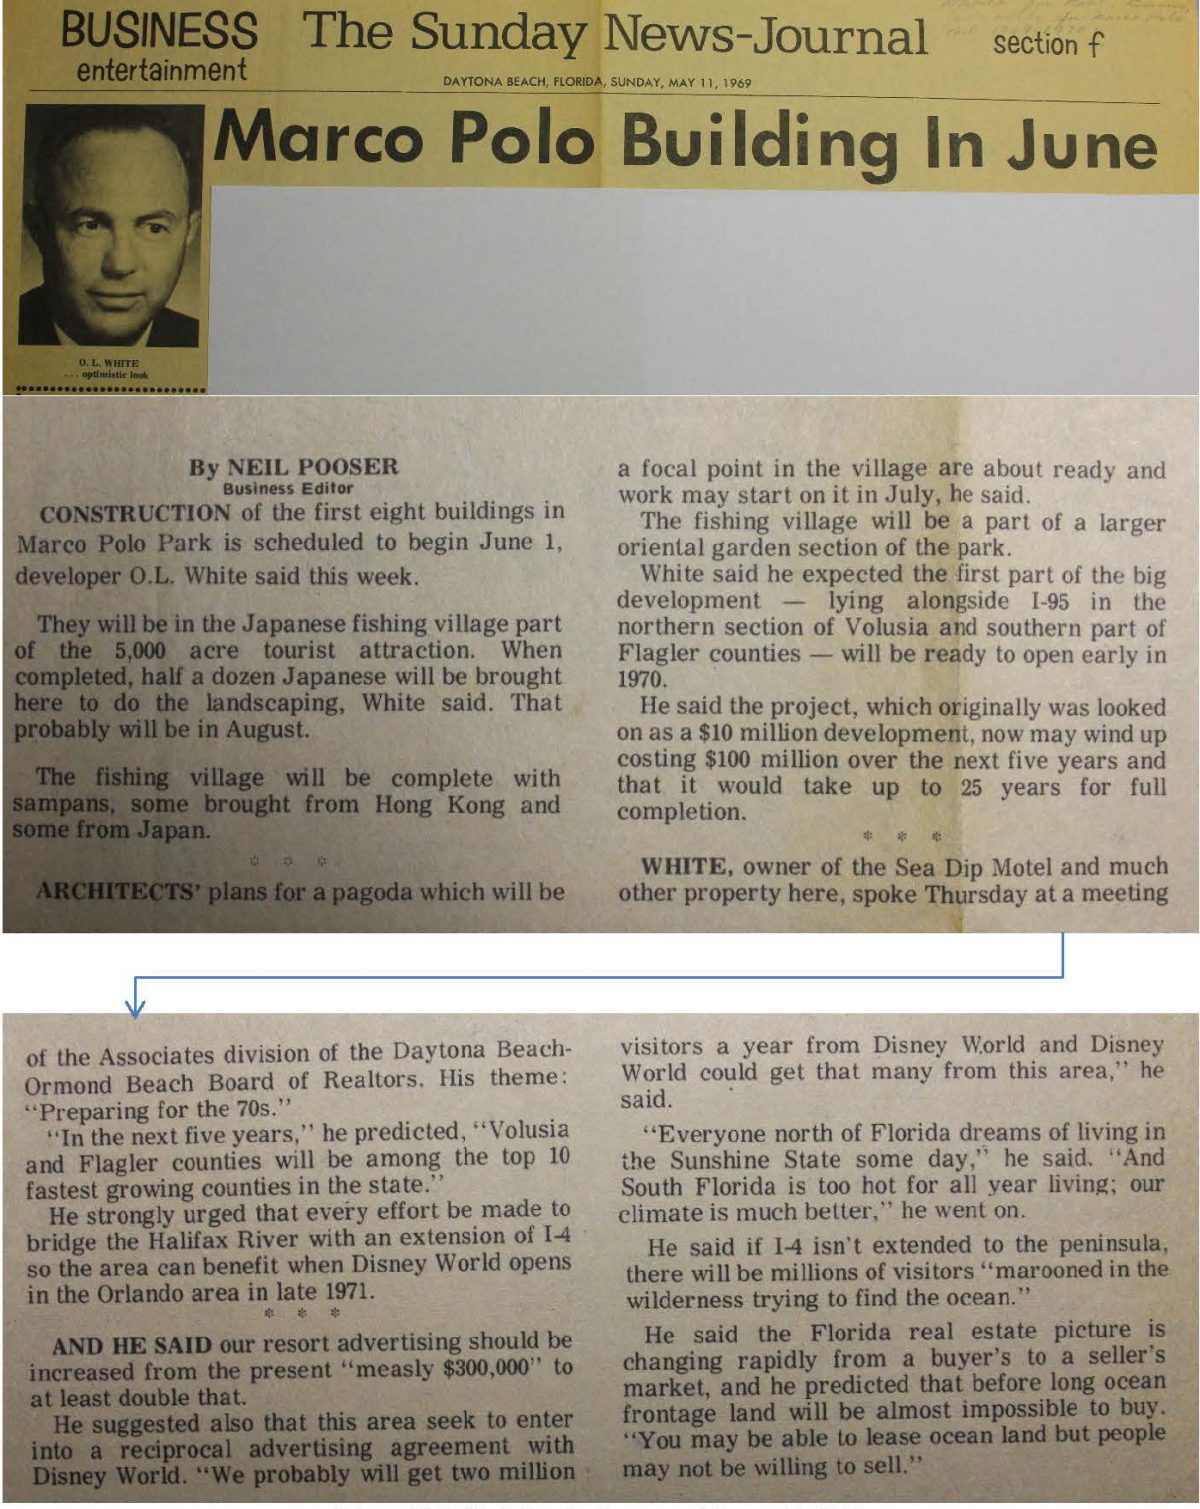 Marco Polo Building in June - article - 5-11-1969.